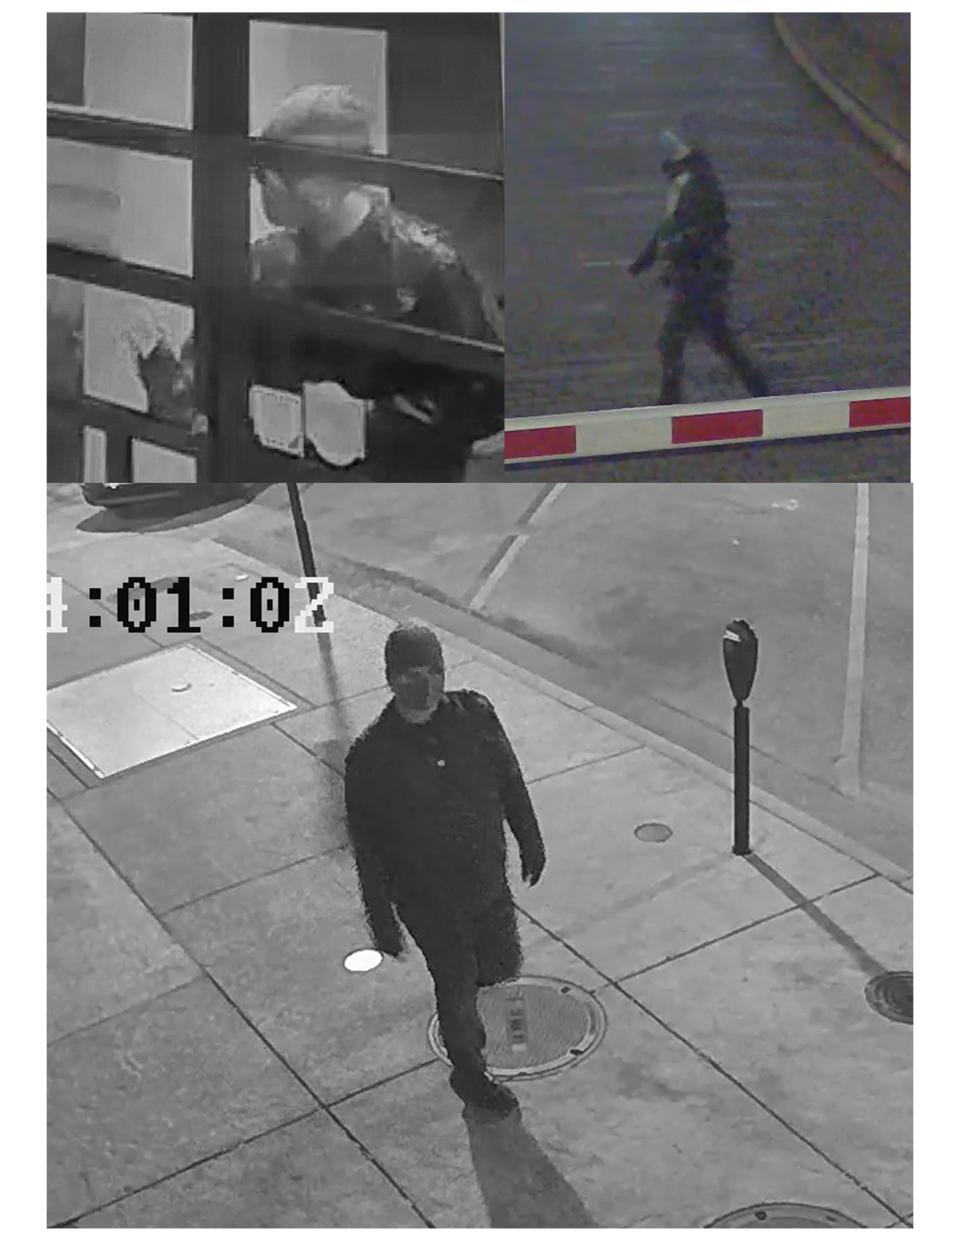 The Alabama Law Enforcement Agency released this image from security camera footage of a person of interest in an explosion near the Alabama Attorney General's Office.